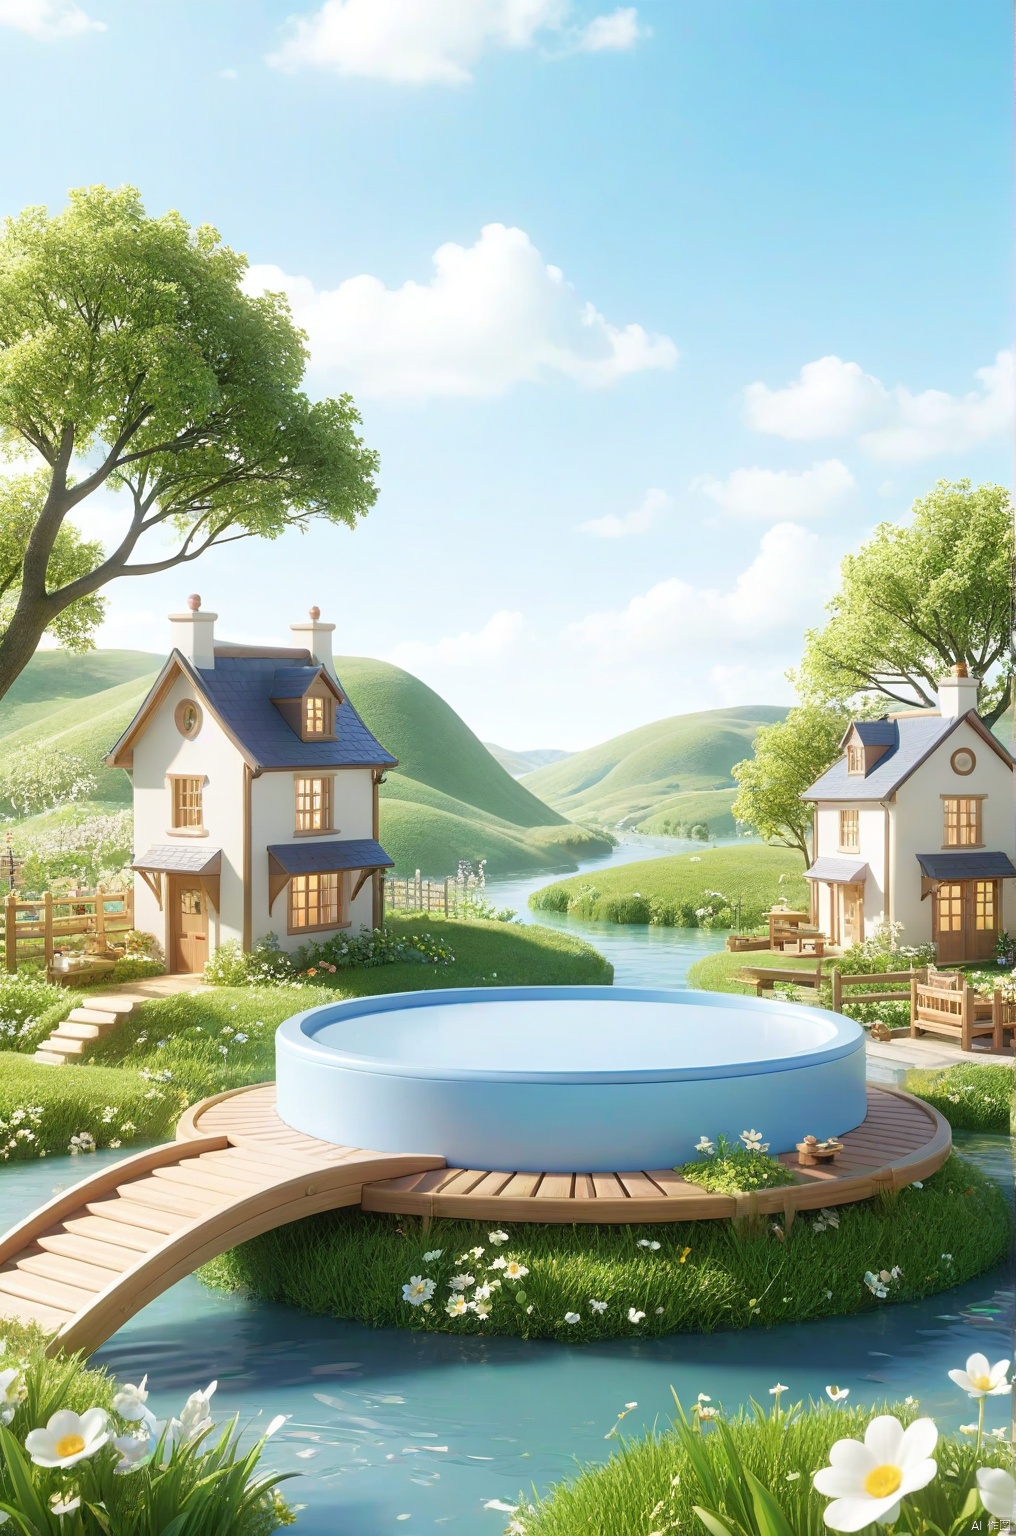 3D_style,
Lovely earth, meadows, rivers, spring. There are some lovely 3d renderings of British buildings. Lovely cartoon style background imagism style, unobstructed platform. c4d modeling, 0C renderer. HD quality 4k

professional 3d model, anime artwork pixar, 3d style, good shine, OC rendering, highly detailed, volumetric, dramatic lighting, 